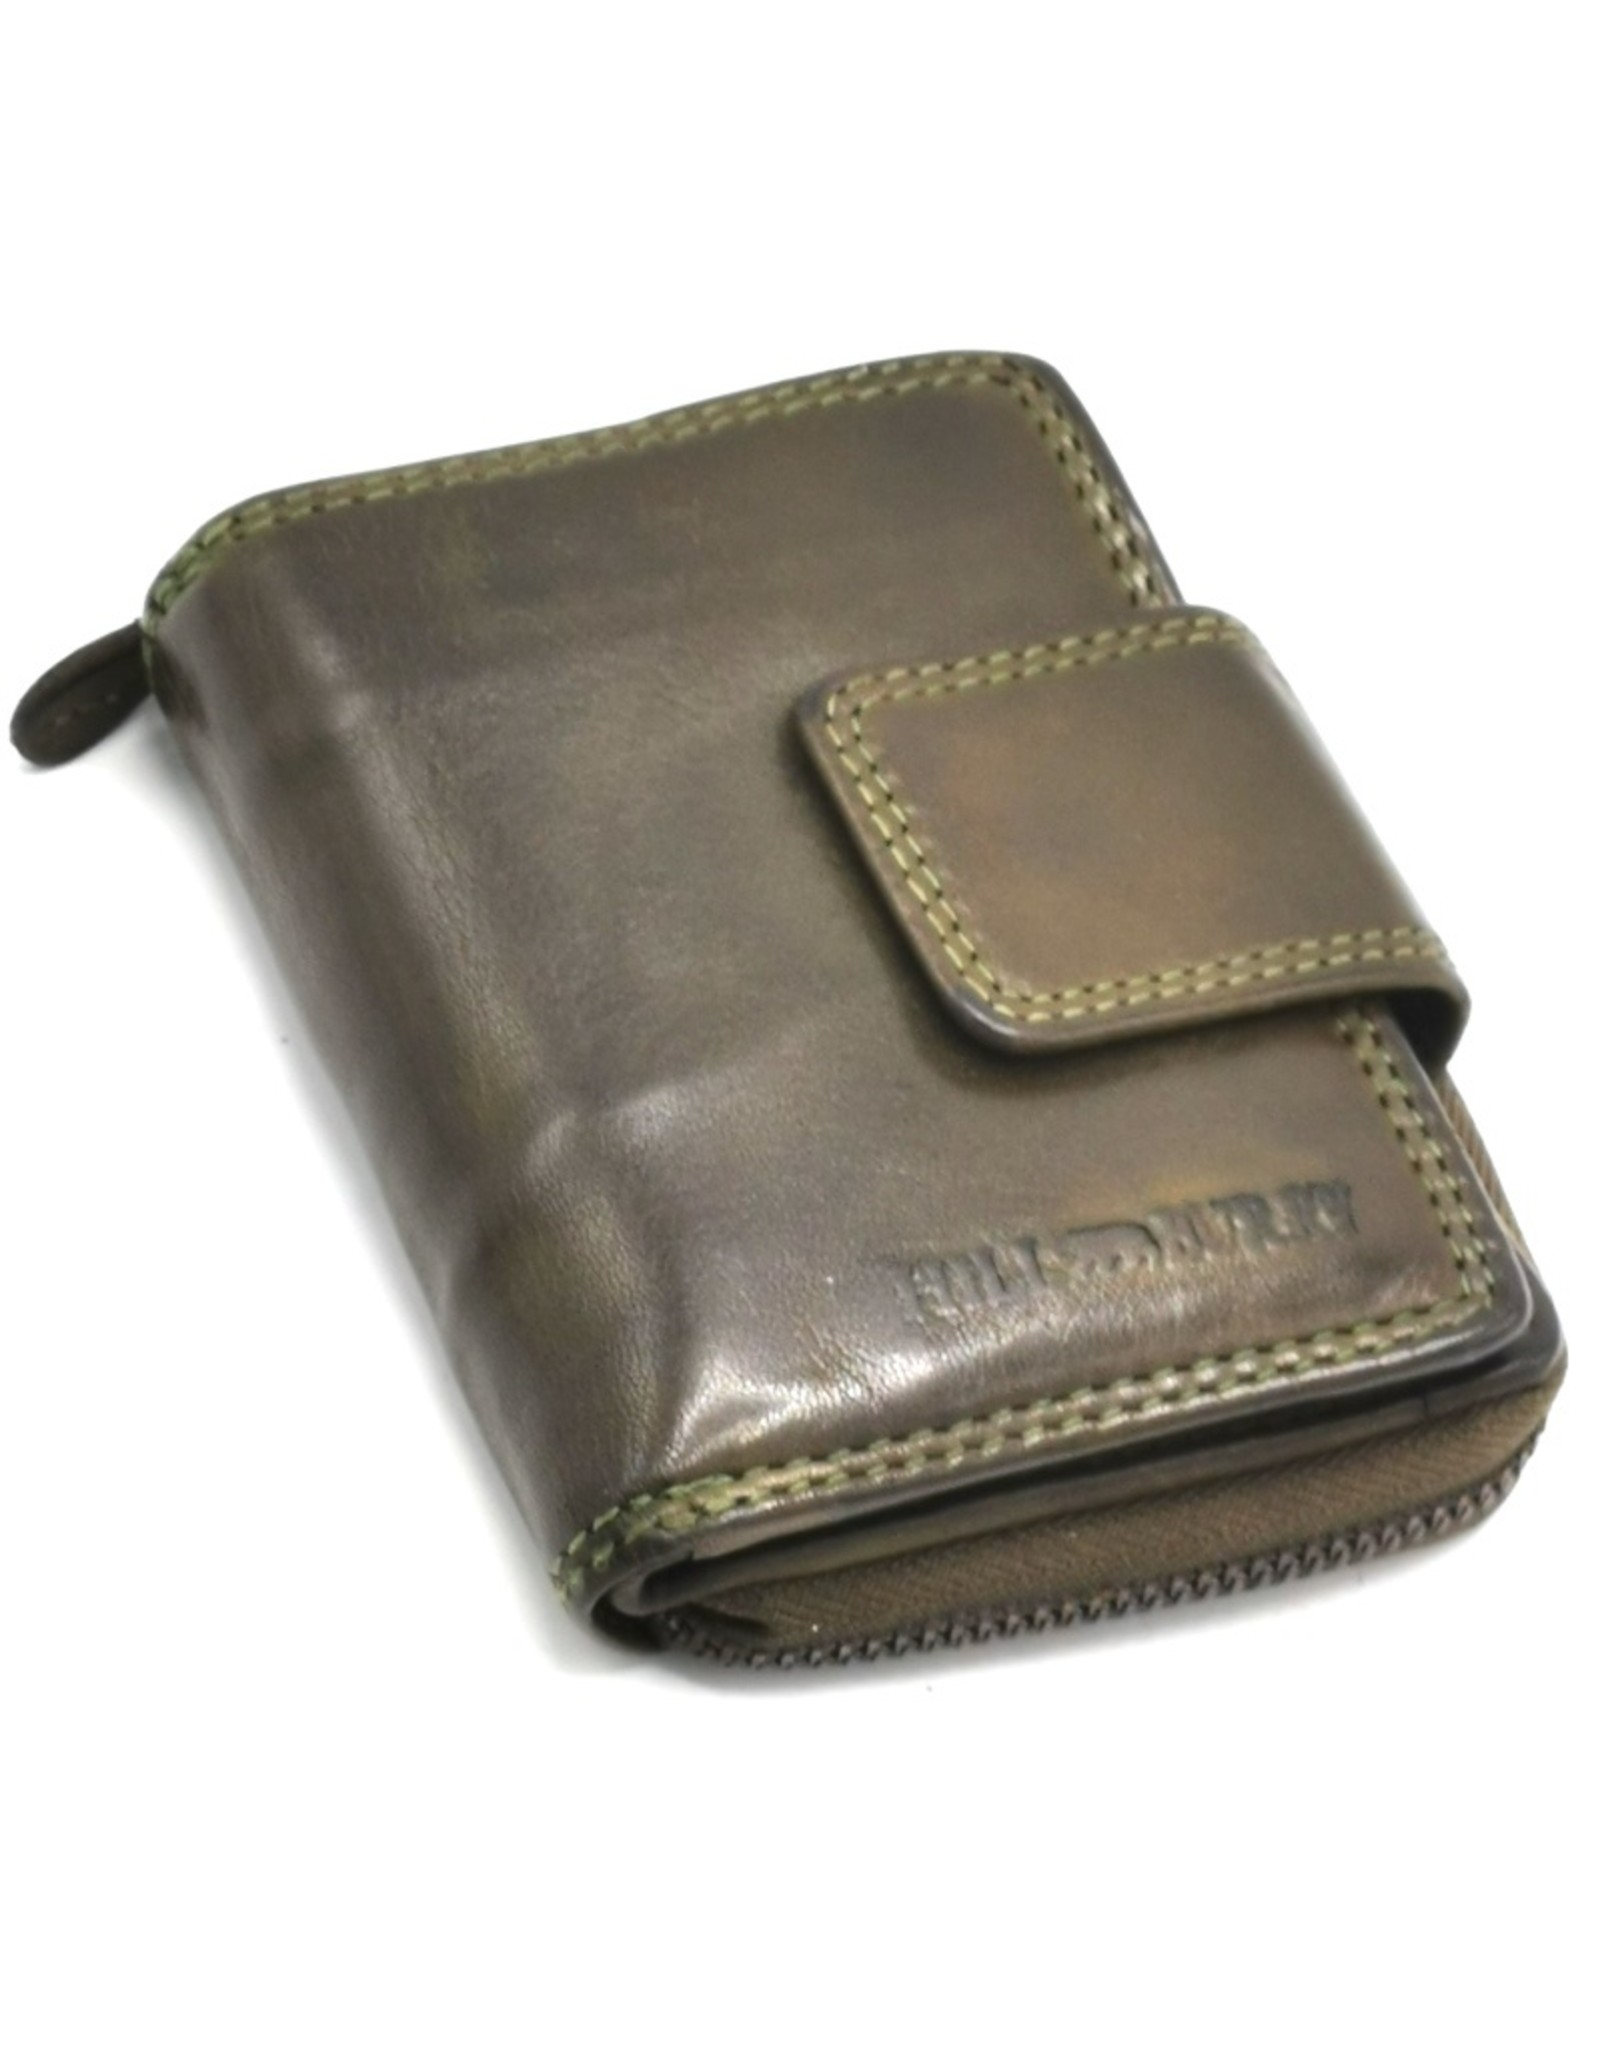 HillBurry Leather Wallets - HillBurry Wallet Washed Leather Olive Green